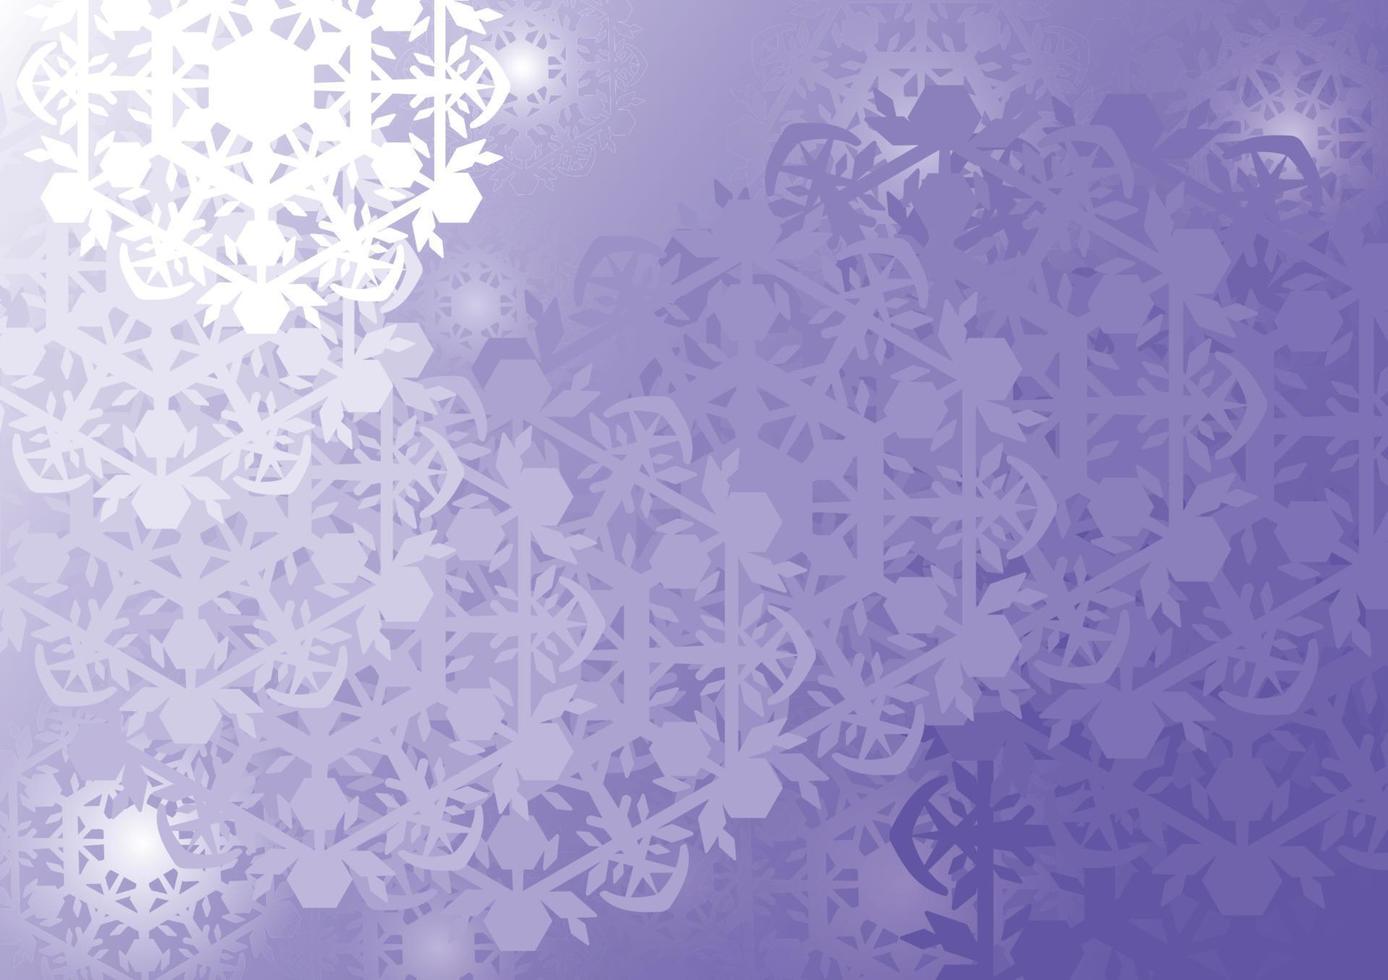 Abstract background, Paper cut Snowflakes layer. vector illustration.